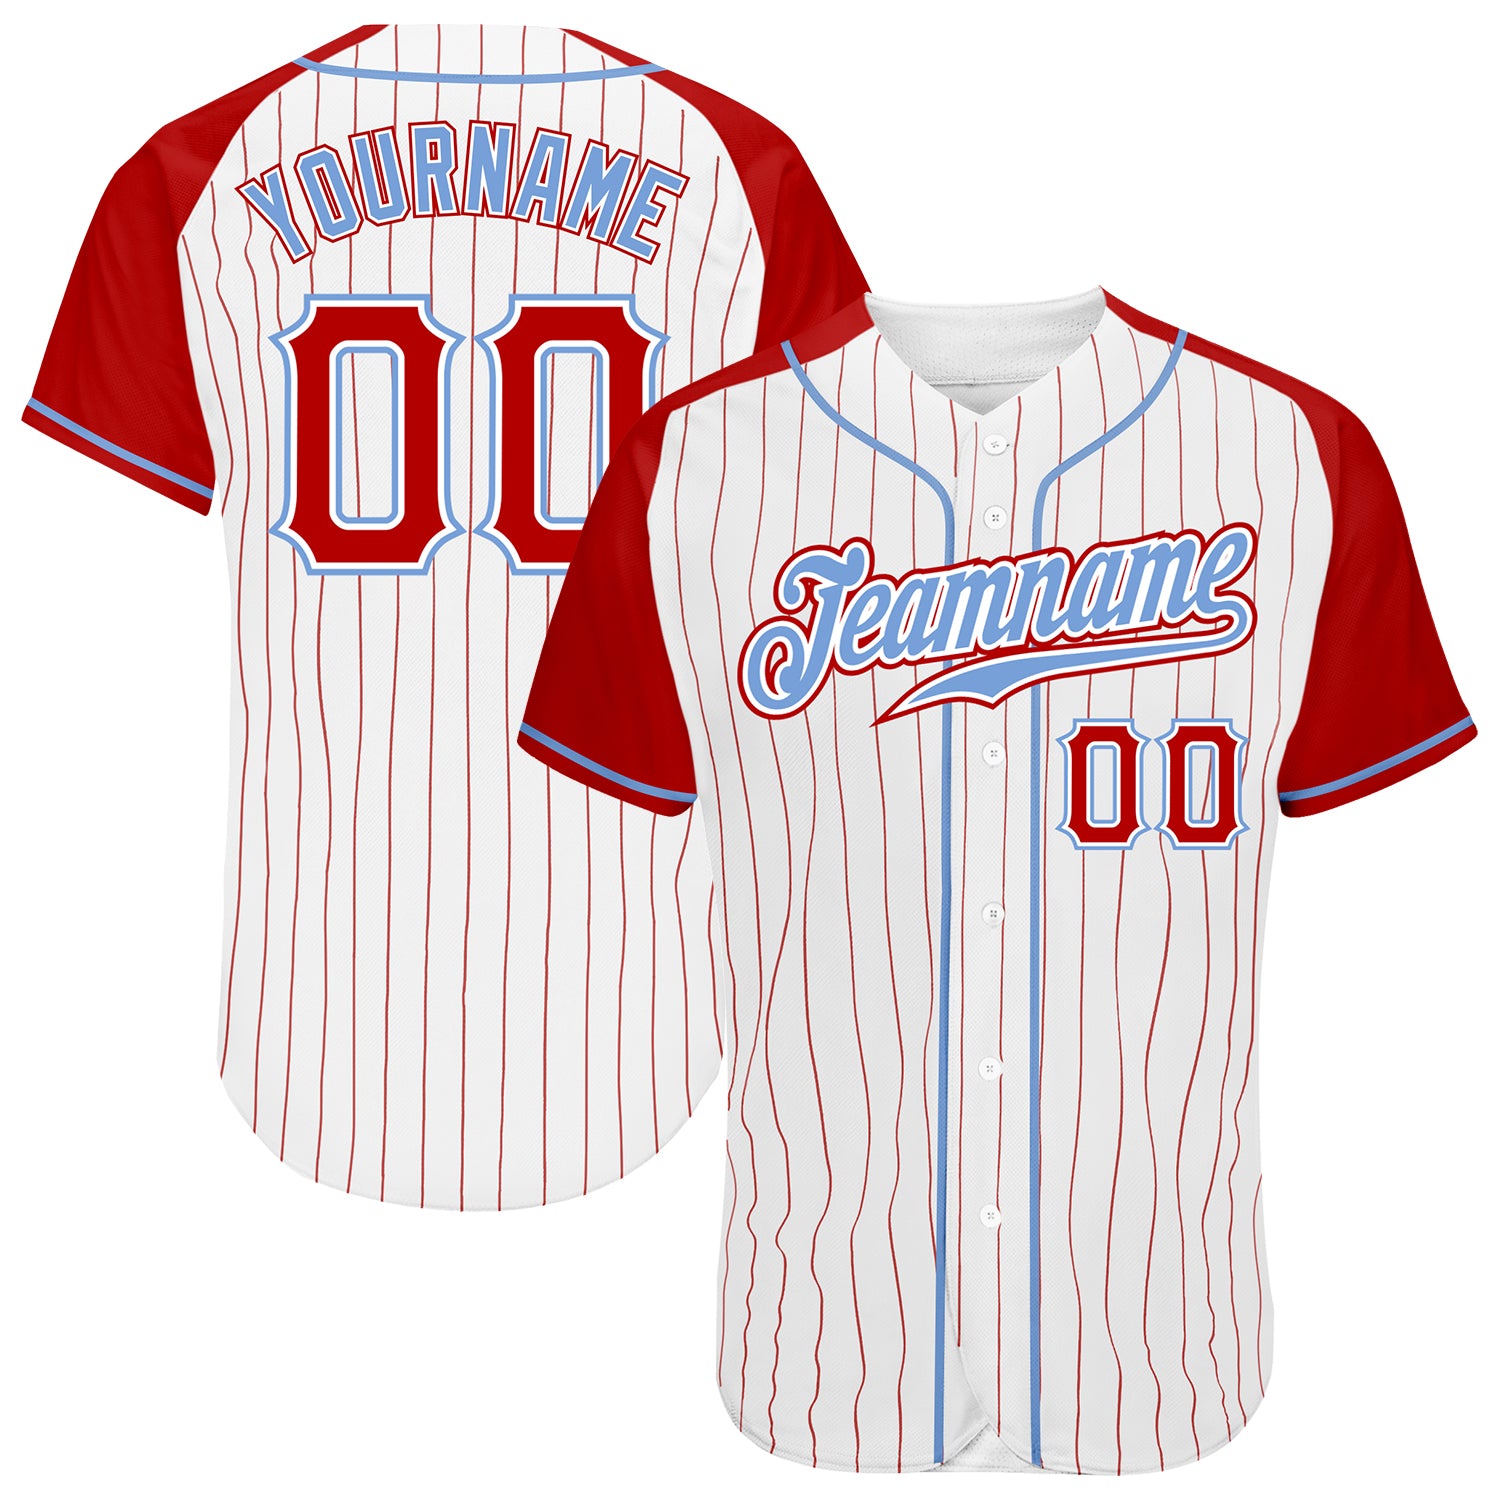 White and Red Stripe Baseball Jersey 